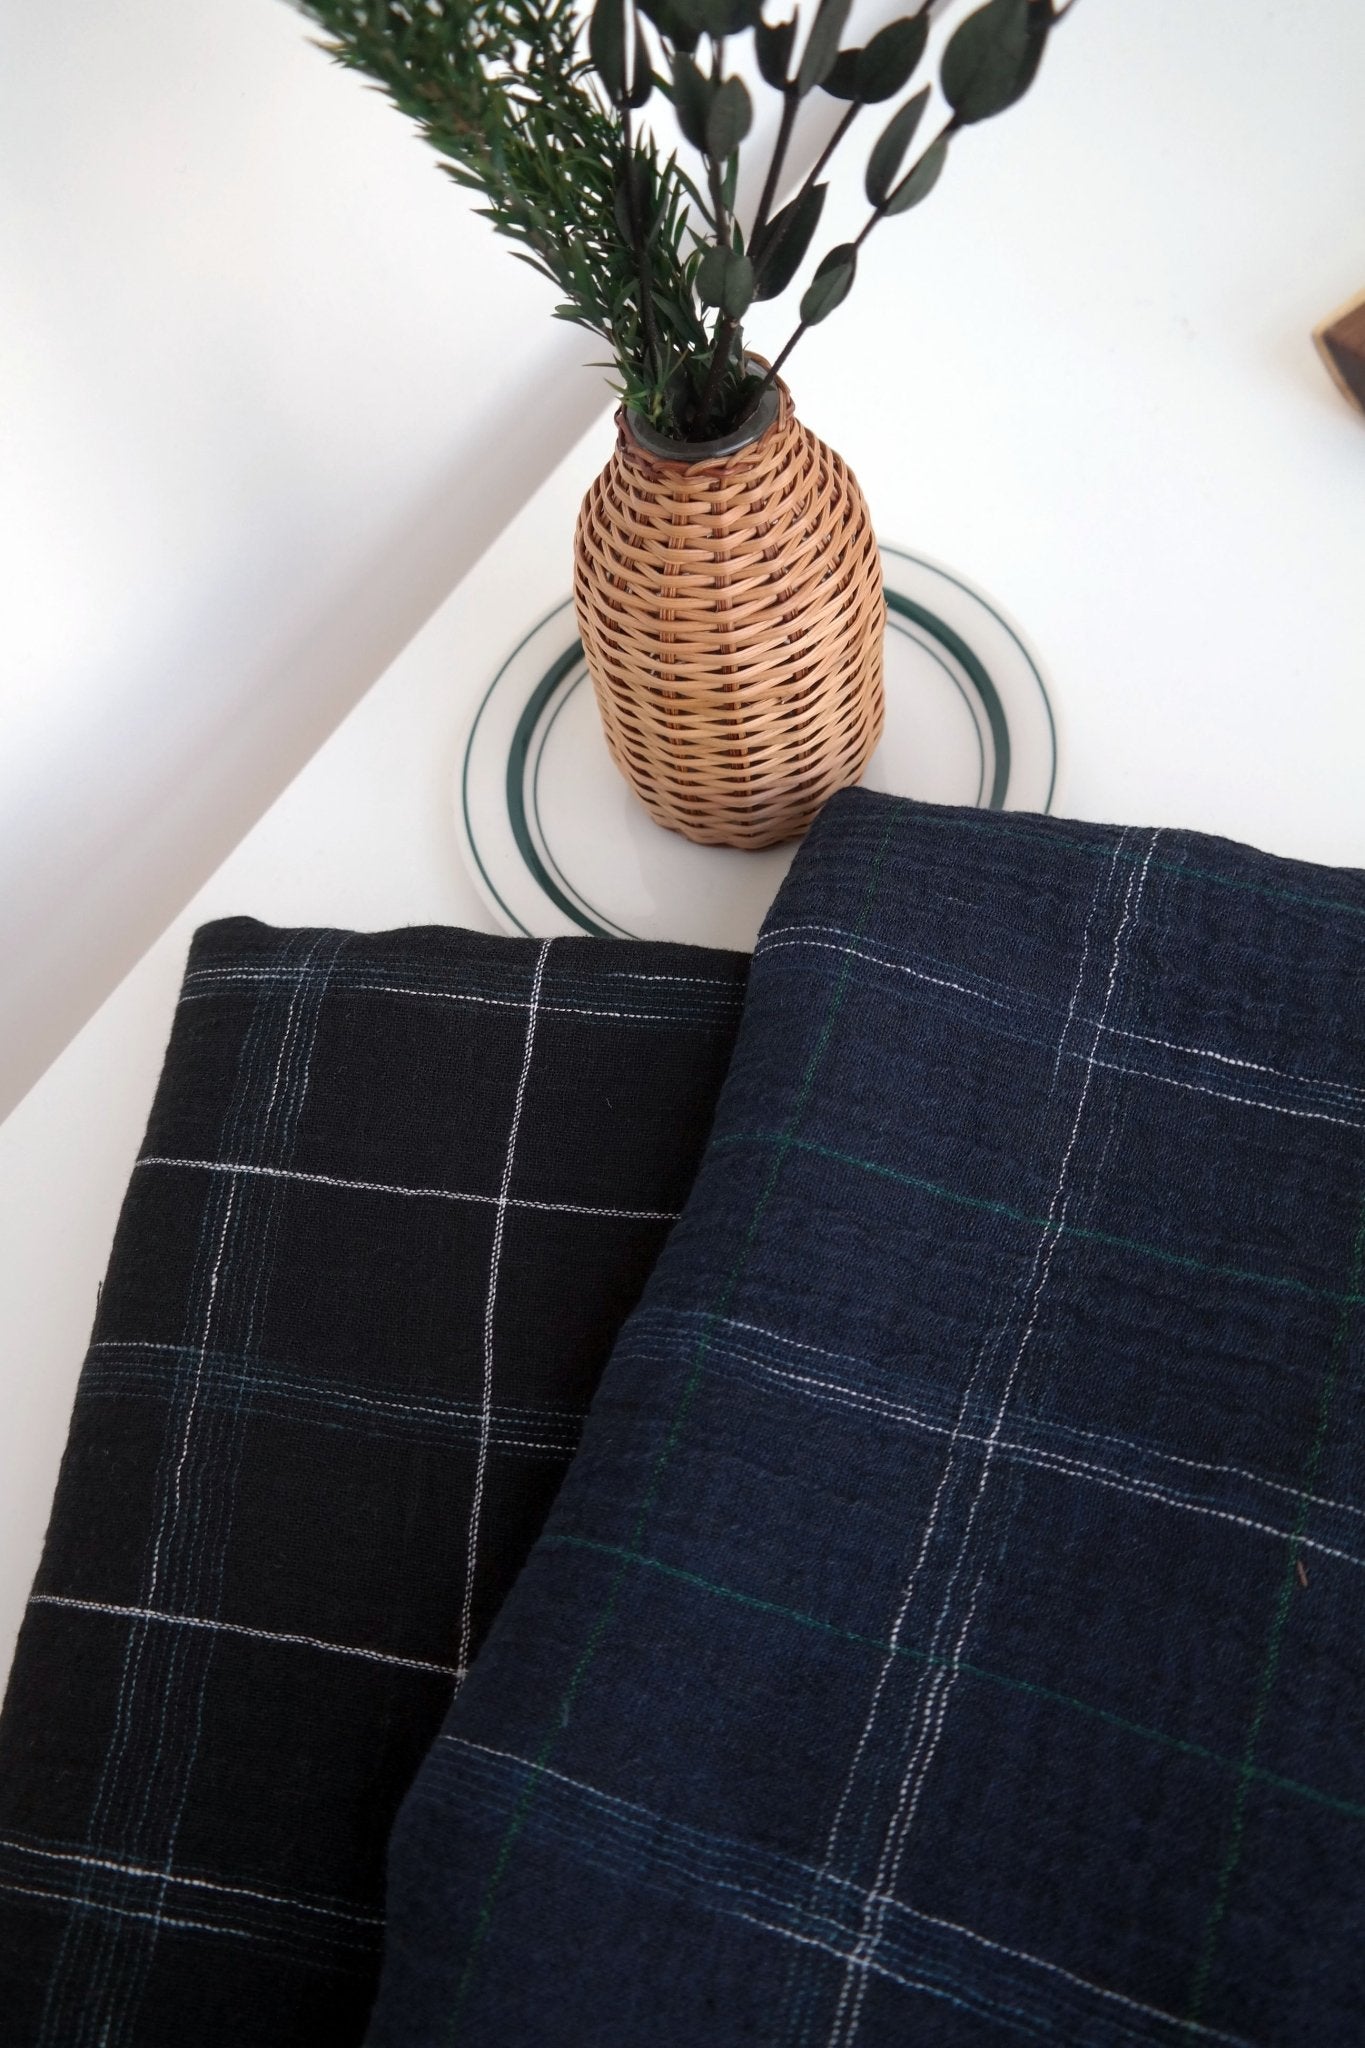 High Twisted Linen Fabric with Wrinkle Effect -Spaced Dyed Windowpane Check 6645 6688 - The Linen Lab - NAVY 6688